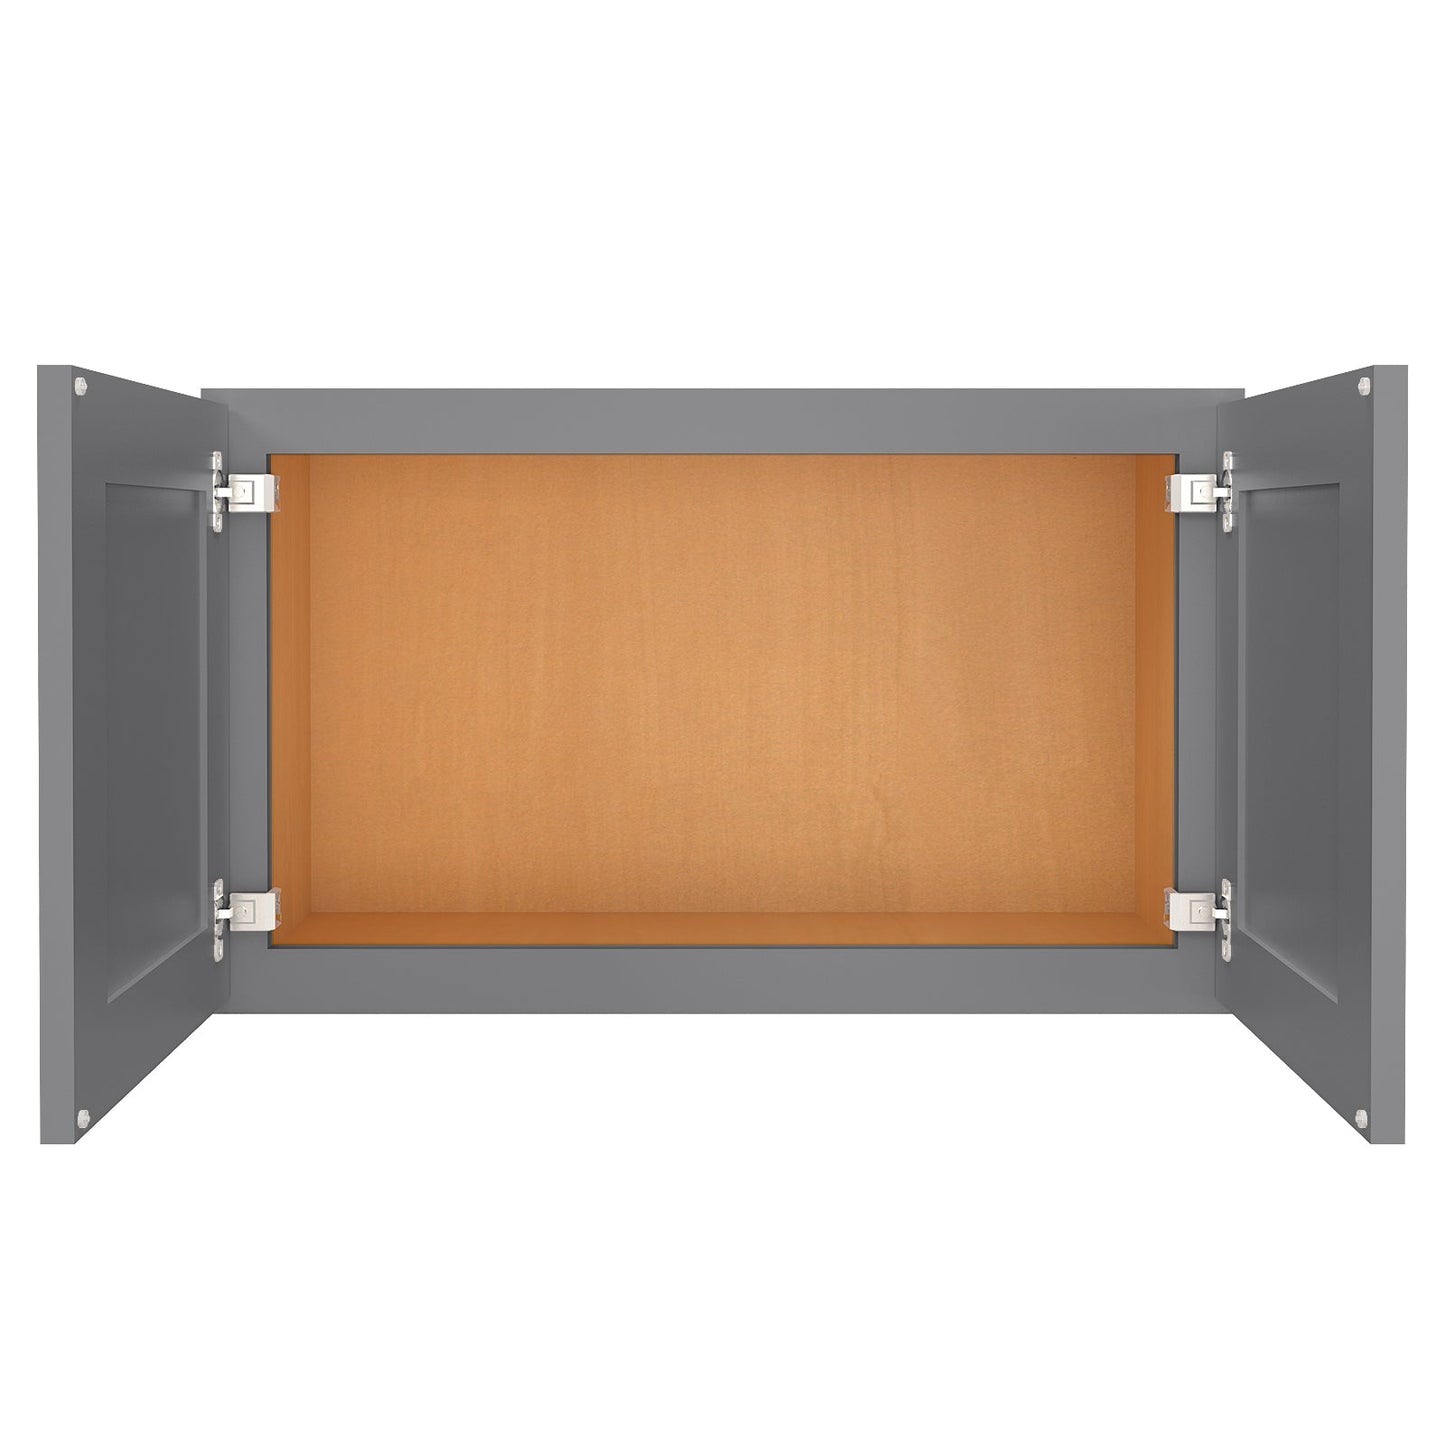 Medicine Cabinet Wall Mounted W3018